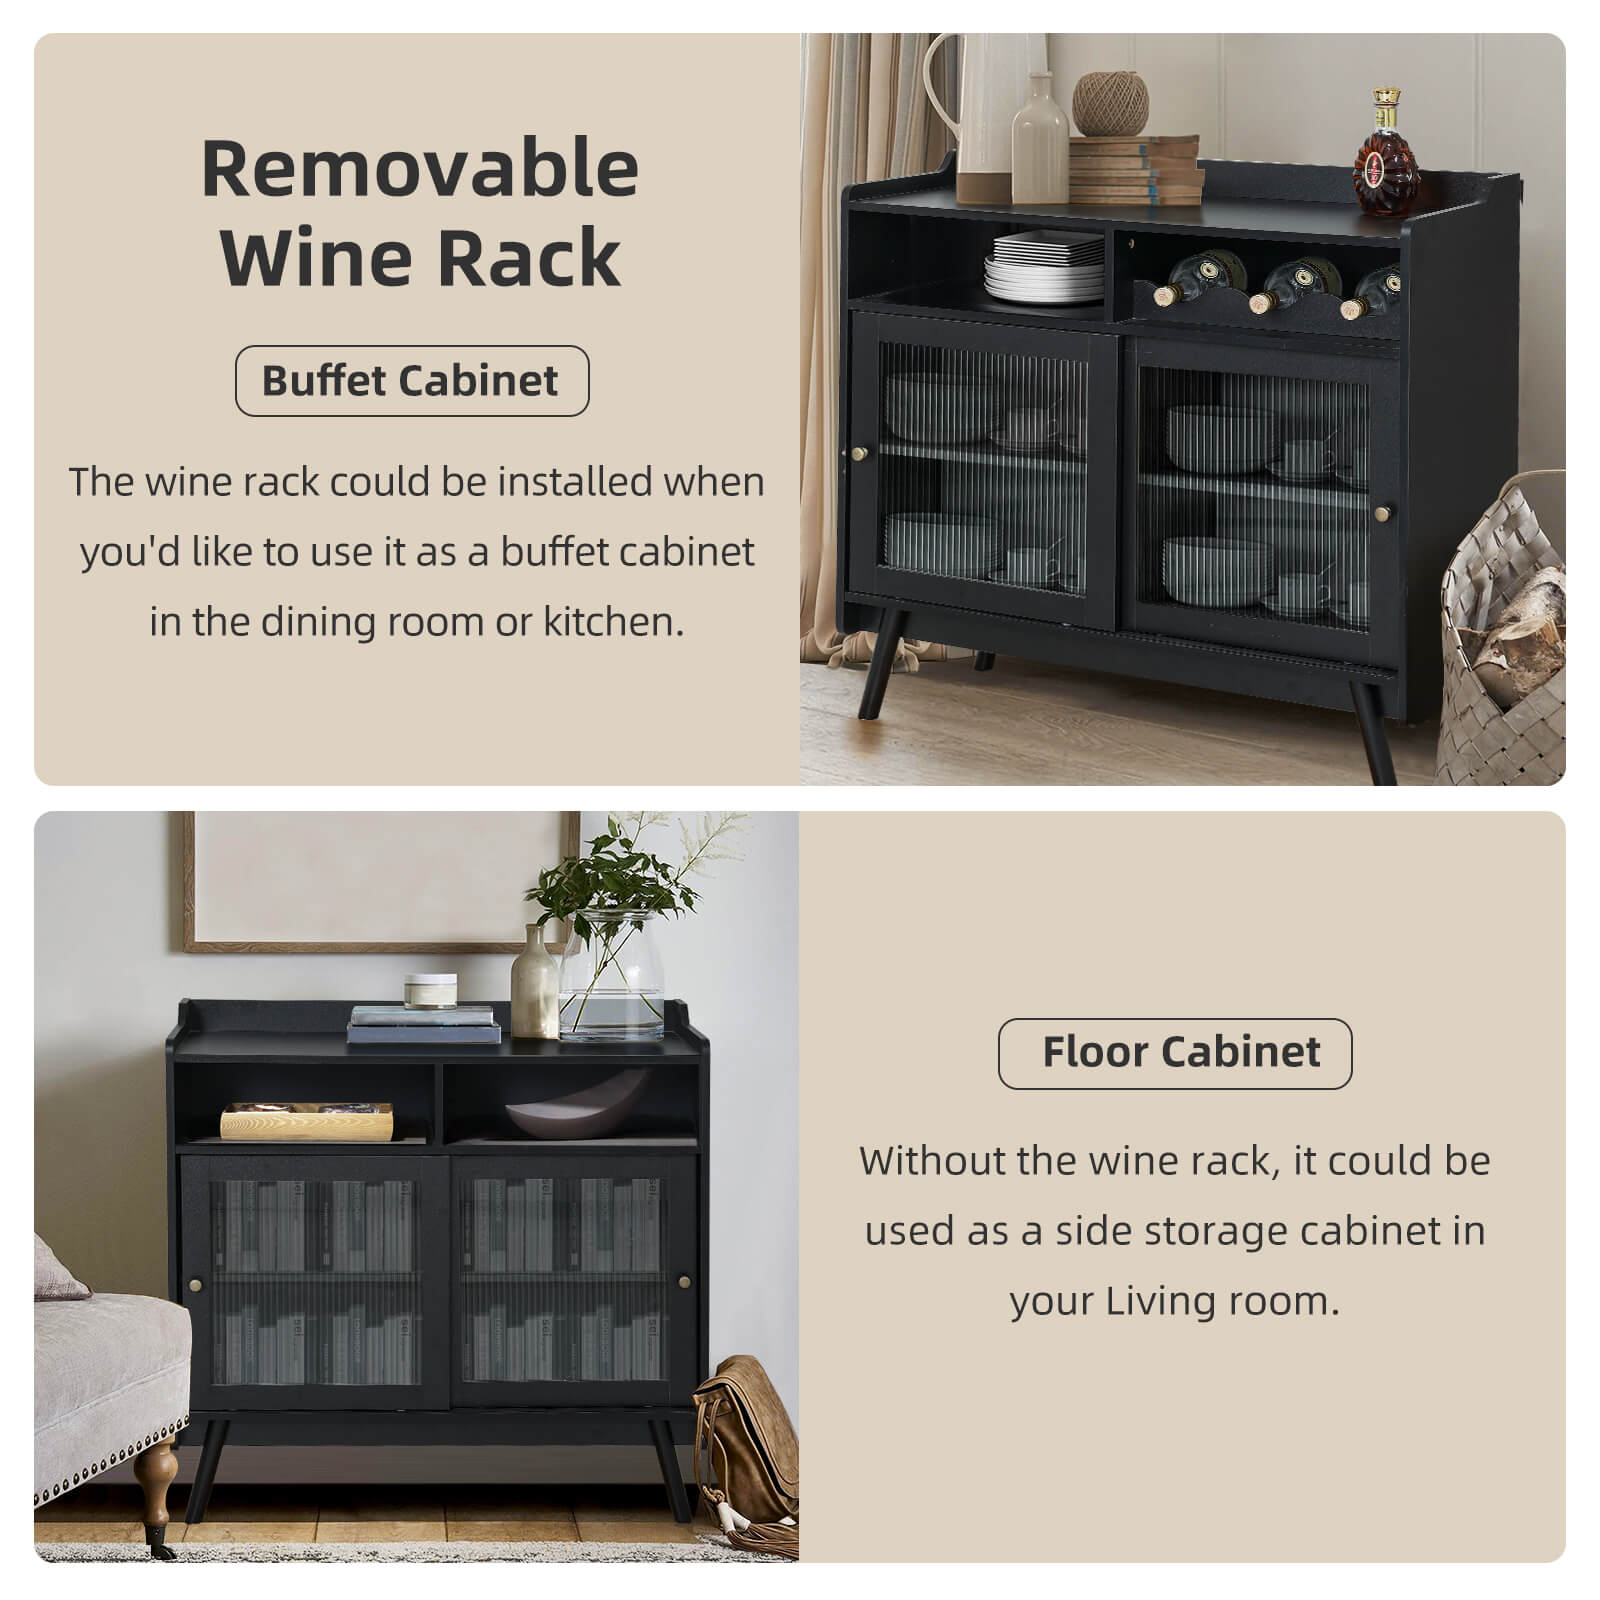 Elecwish Buffet Cabinet with Storage KA001  can be removable wine rack and floor cabinet